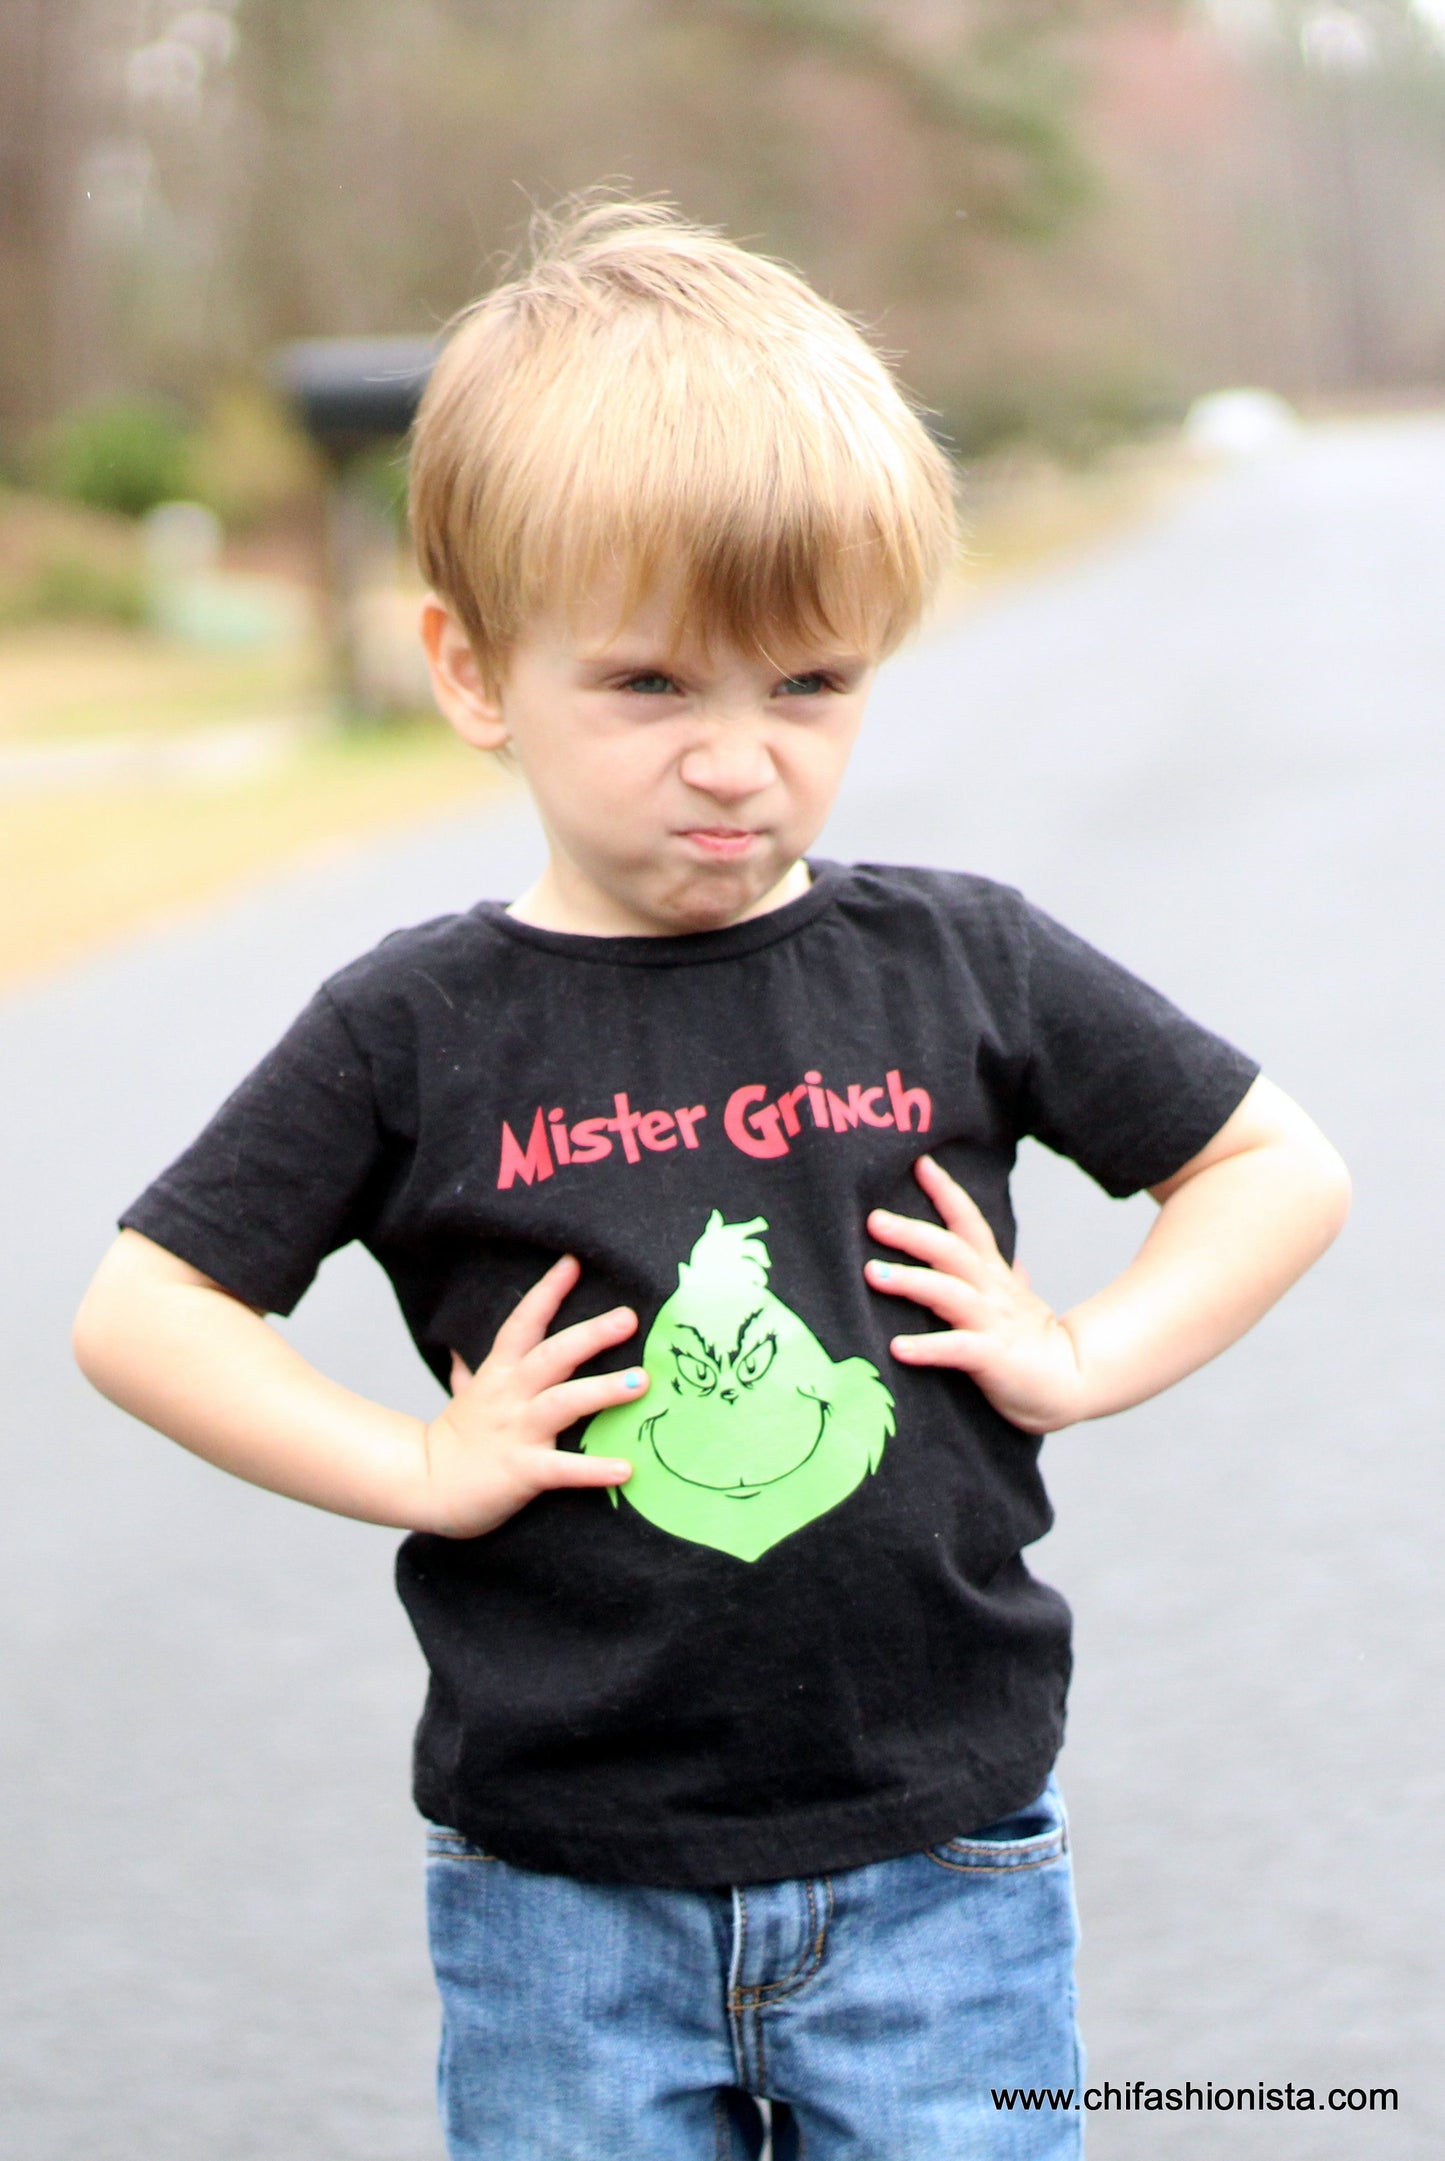 Mister Grinch- Suess